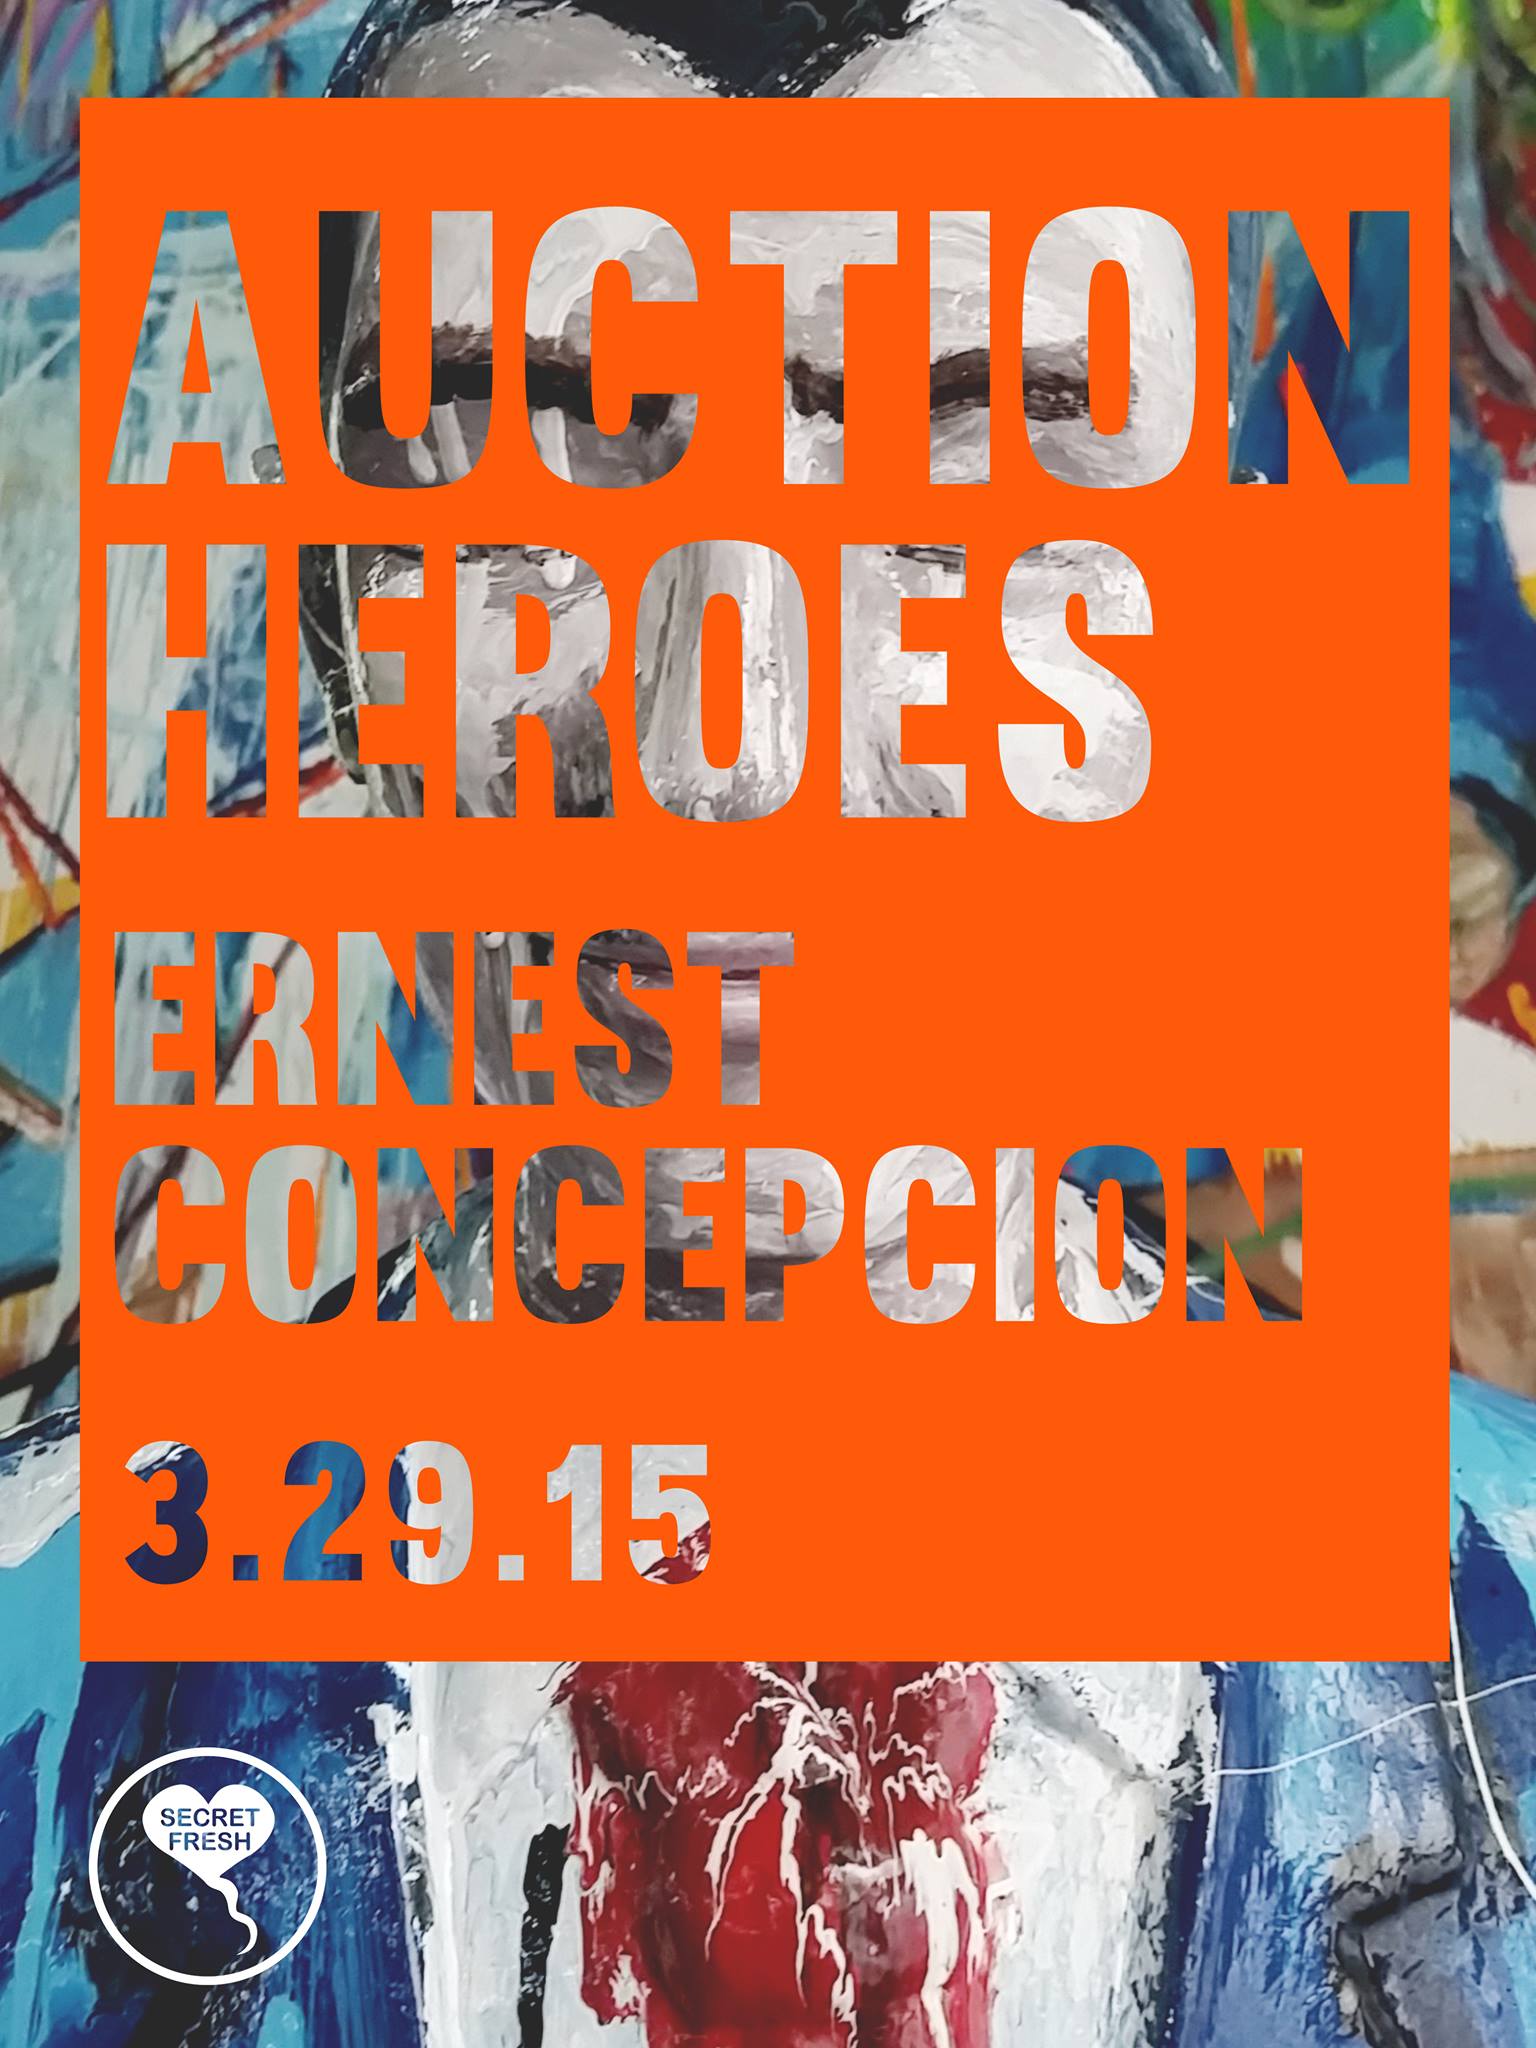 150329_auction-heroes